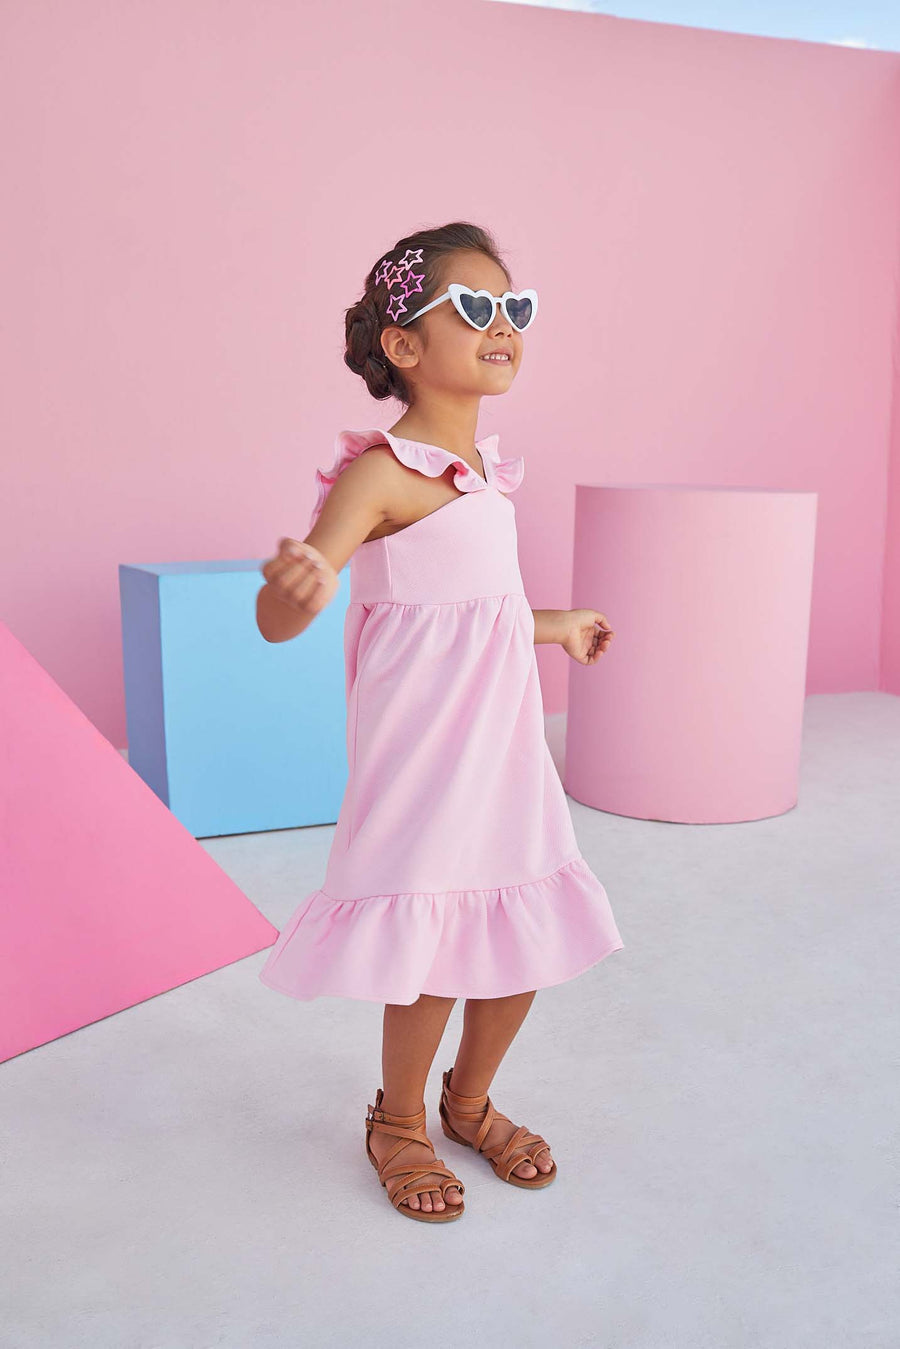 tween girls pink strappy dress with ruffles 